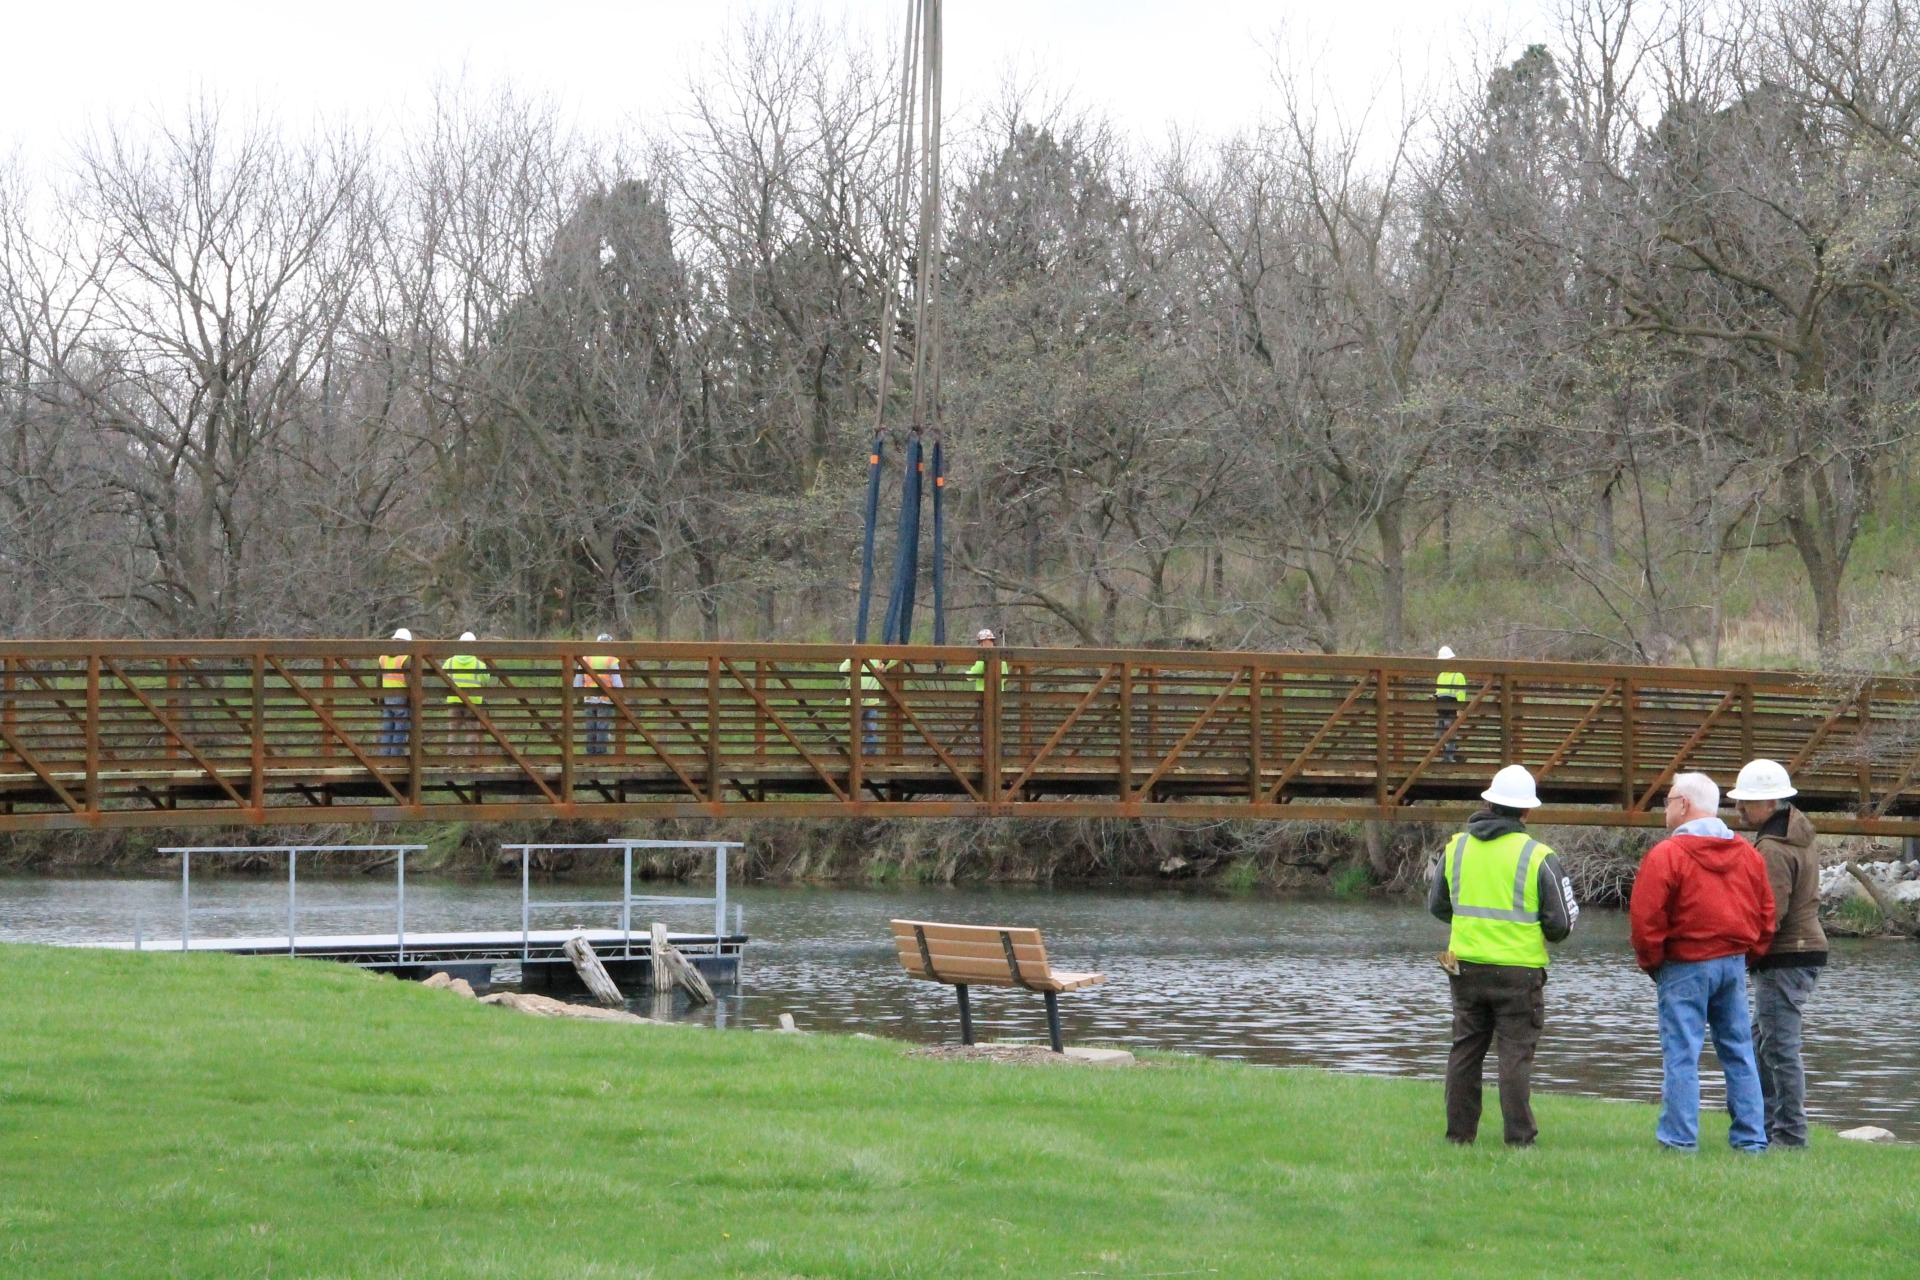 Pottawattamie County staff observe as crew members as they detach the crane from the bridge.